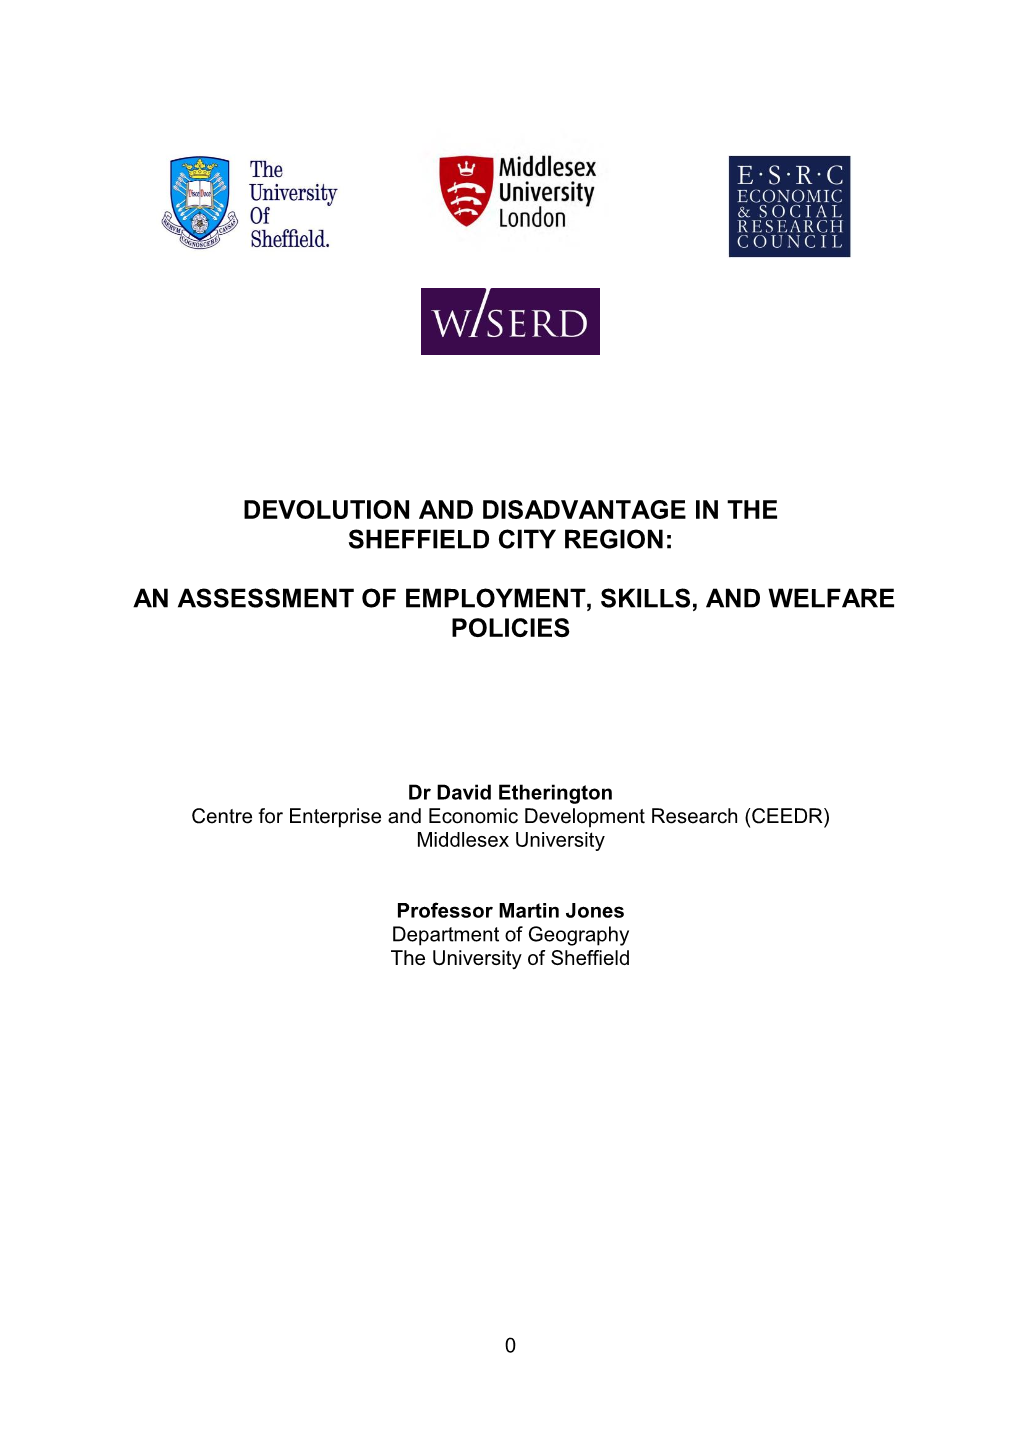 Devolution and Disadvantage in the Sheffield City Region: an Assessment of Employment, Skills, and Welfare Policies